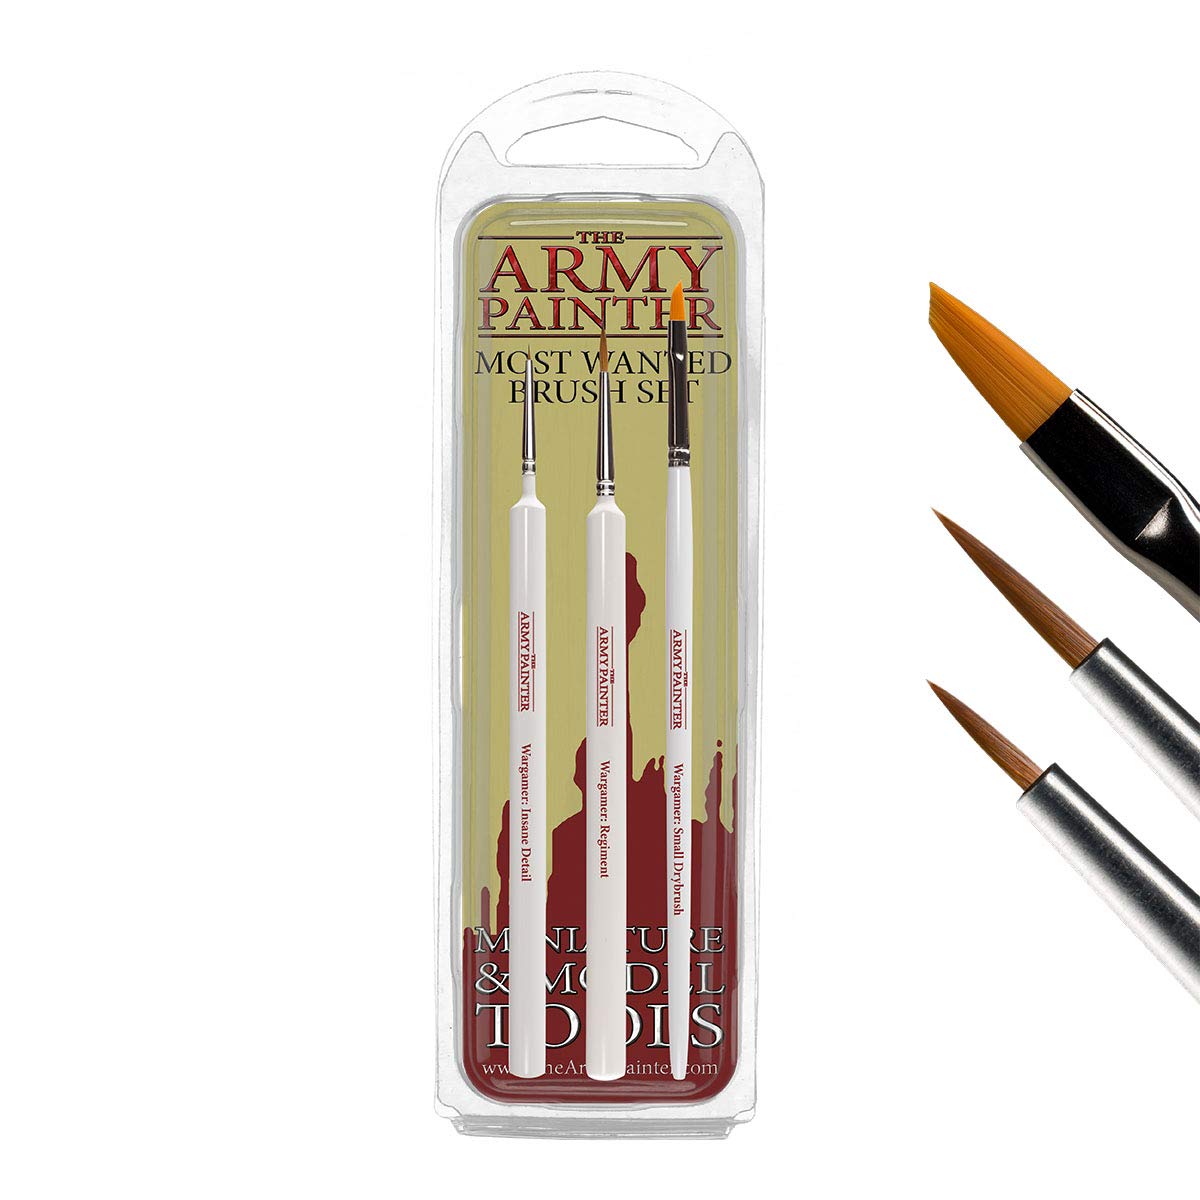 Most Wanted Brush Set Army Painter